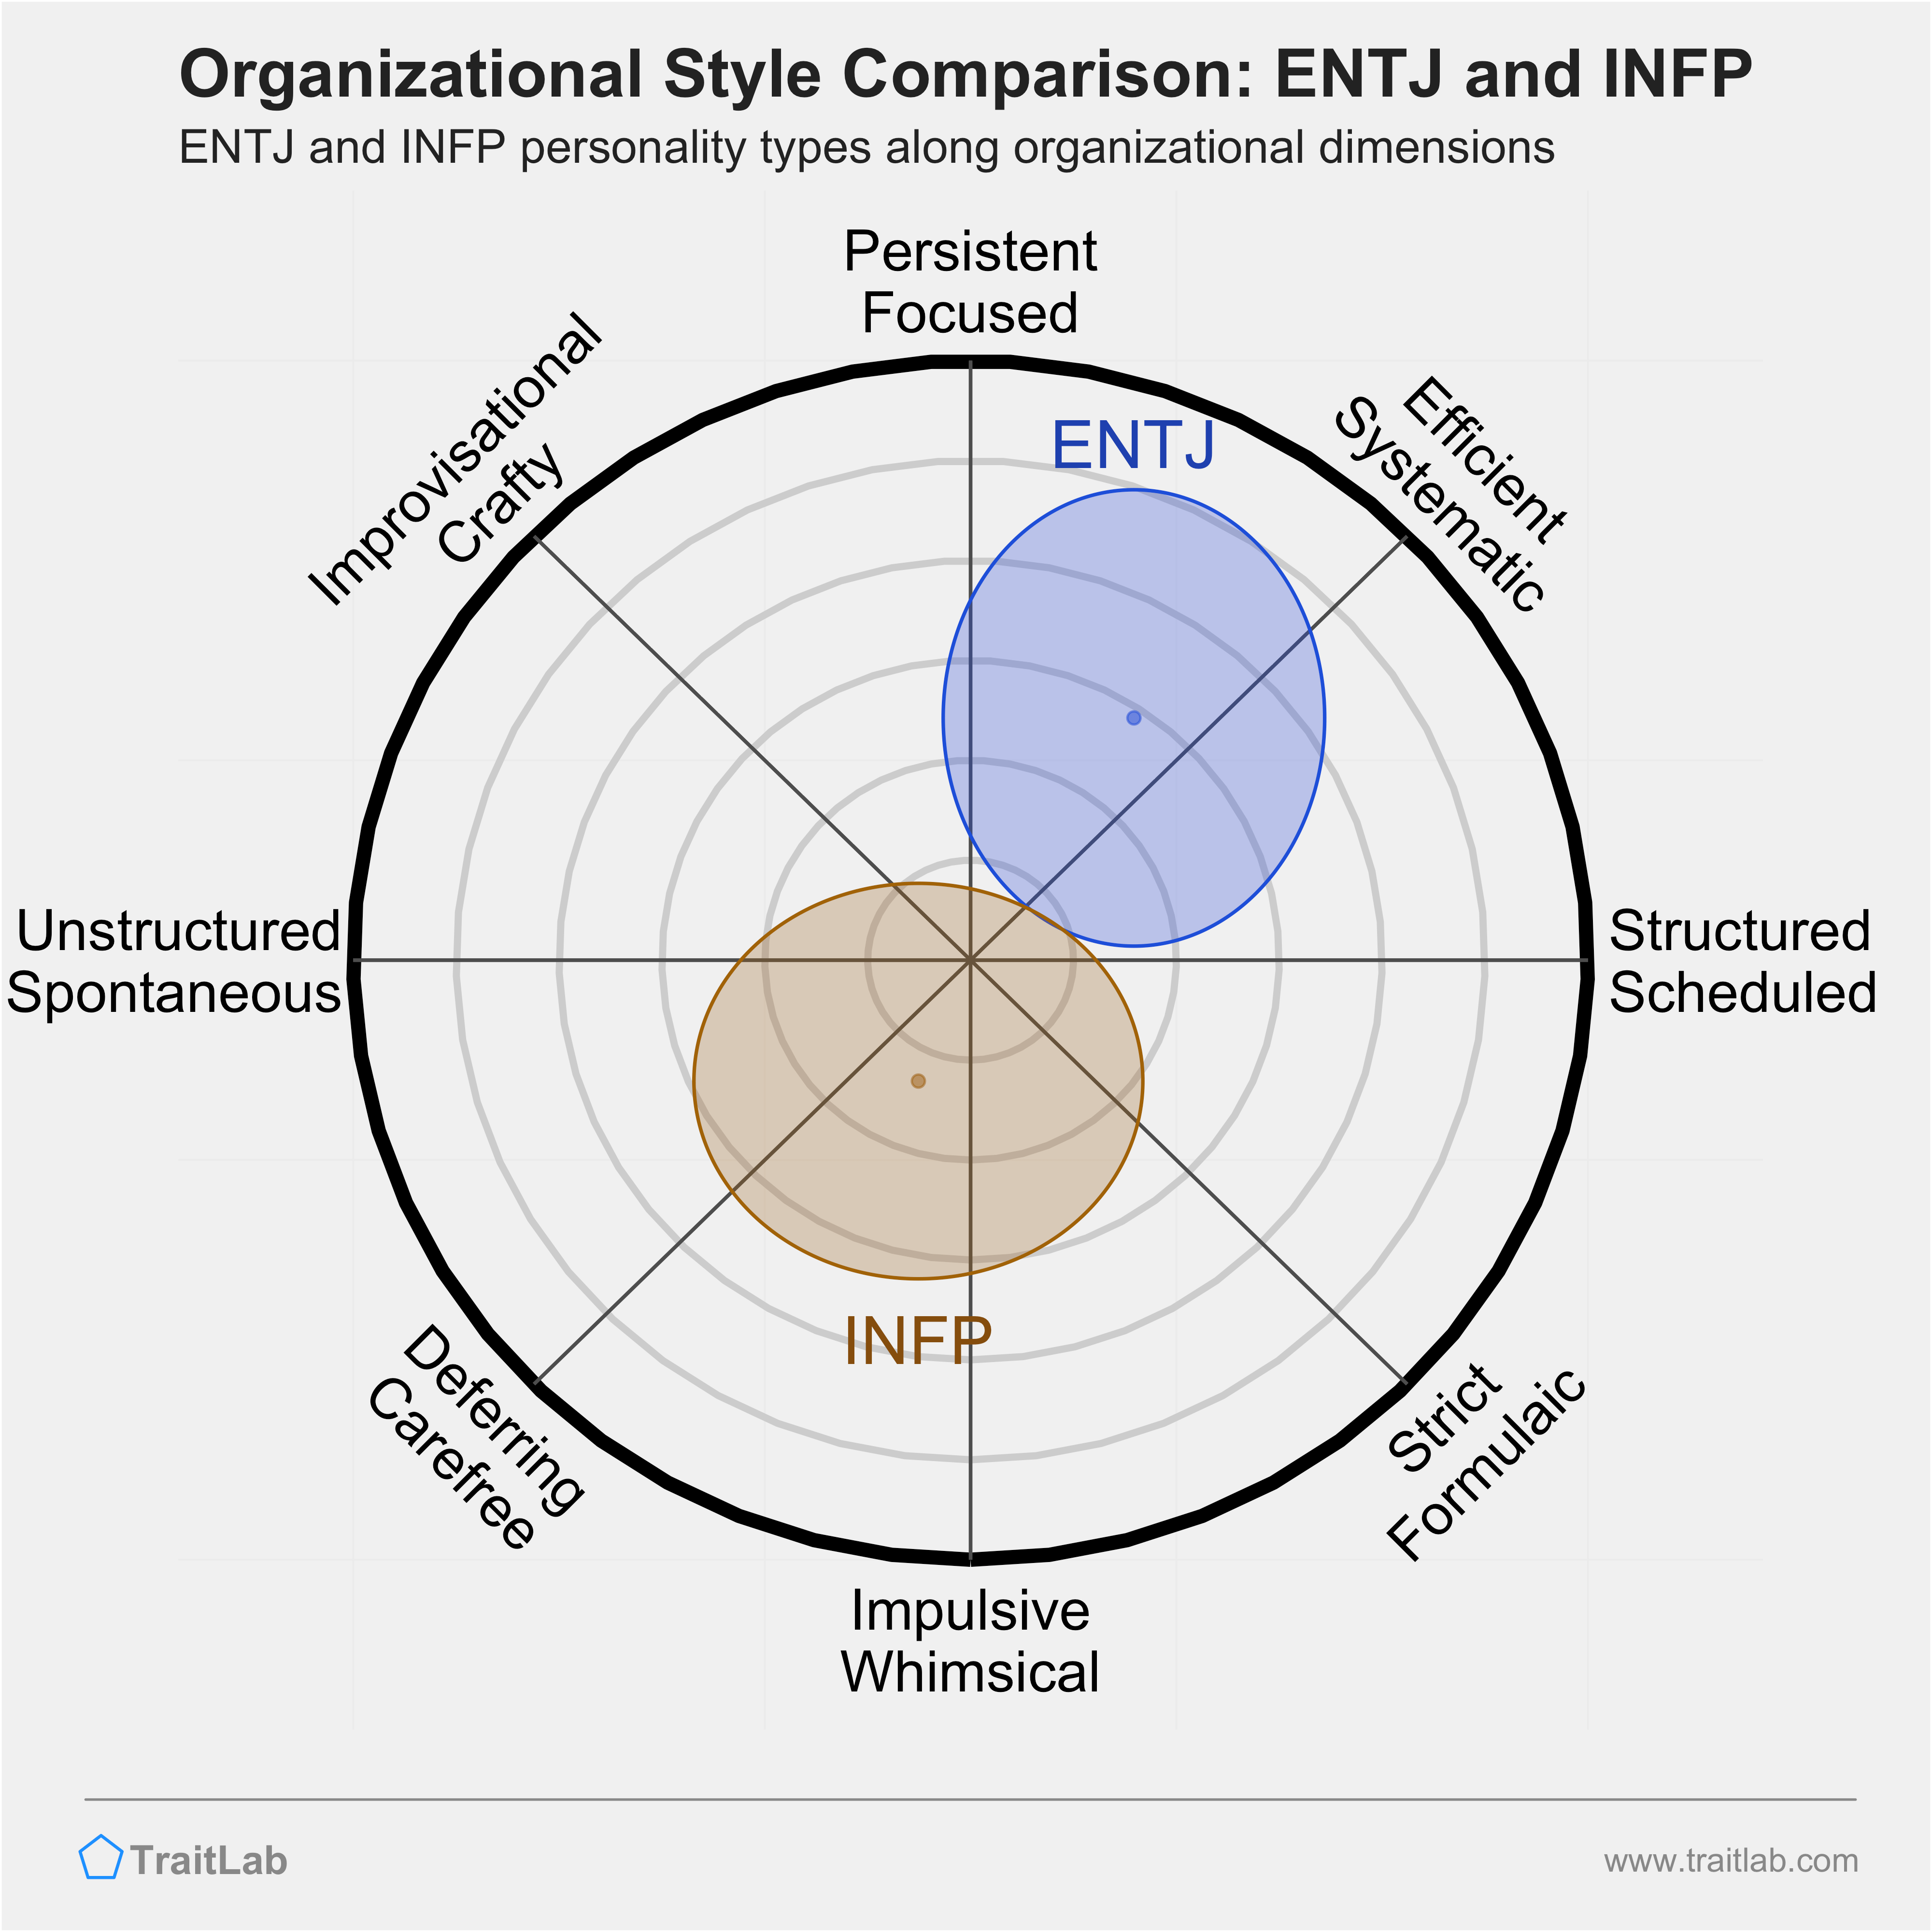 ENTJ and INFP comparison across organizational dimensions